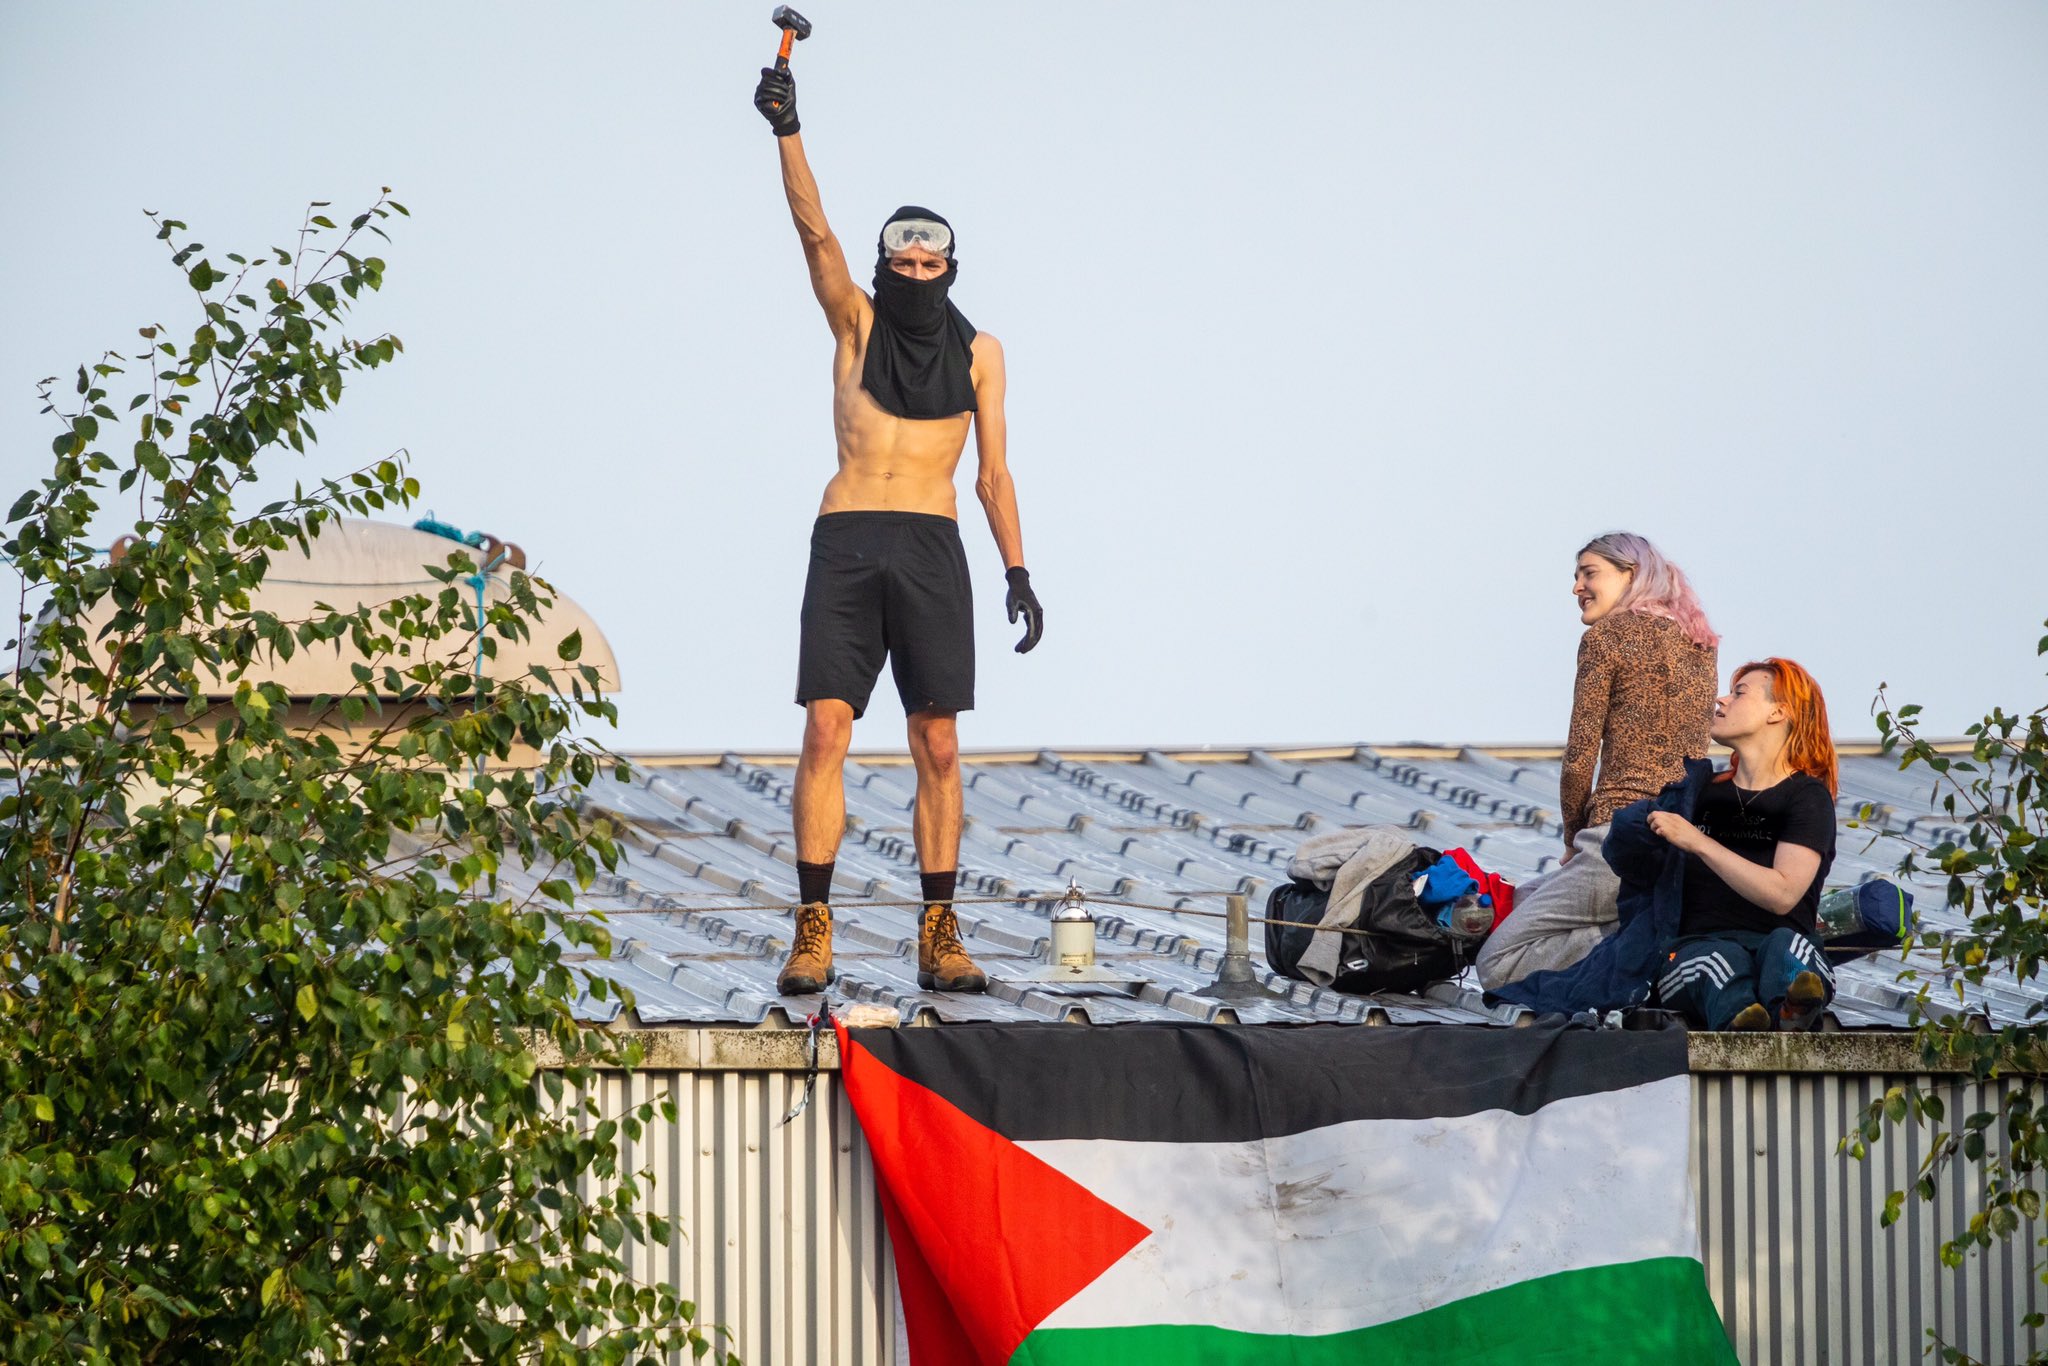 Activists Storm Arms Factory in Scotland over Complicity in Israeli Apartheid